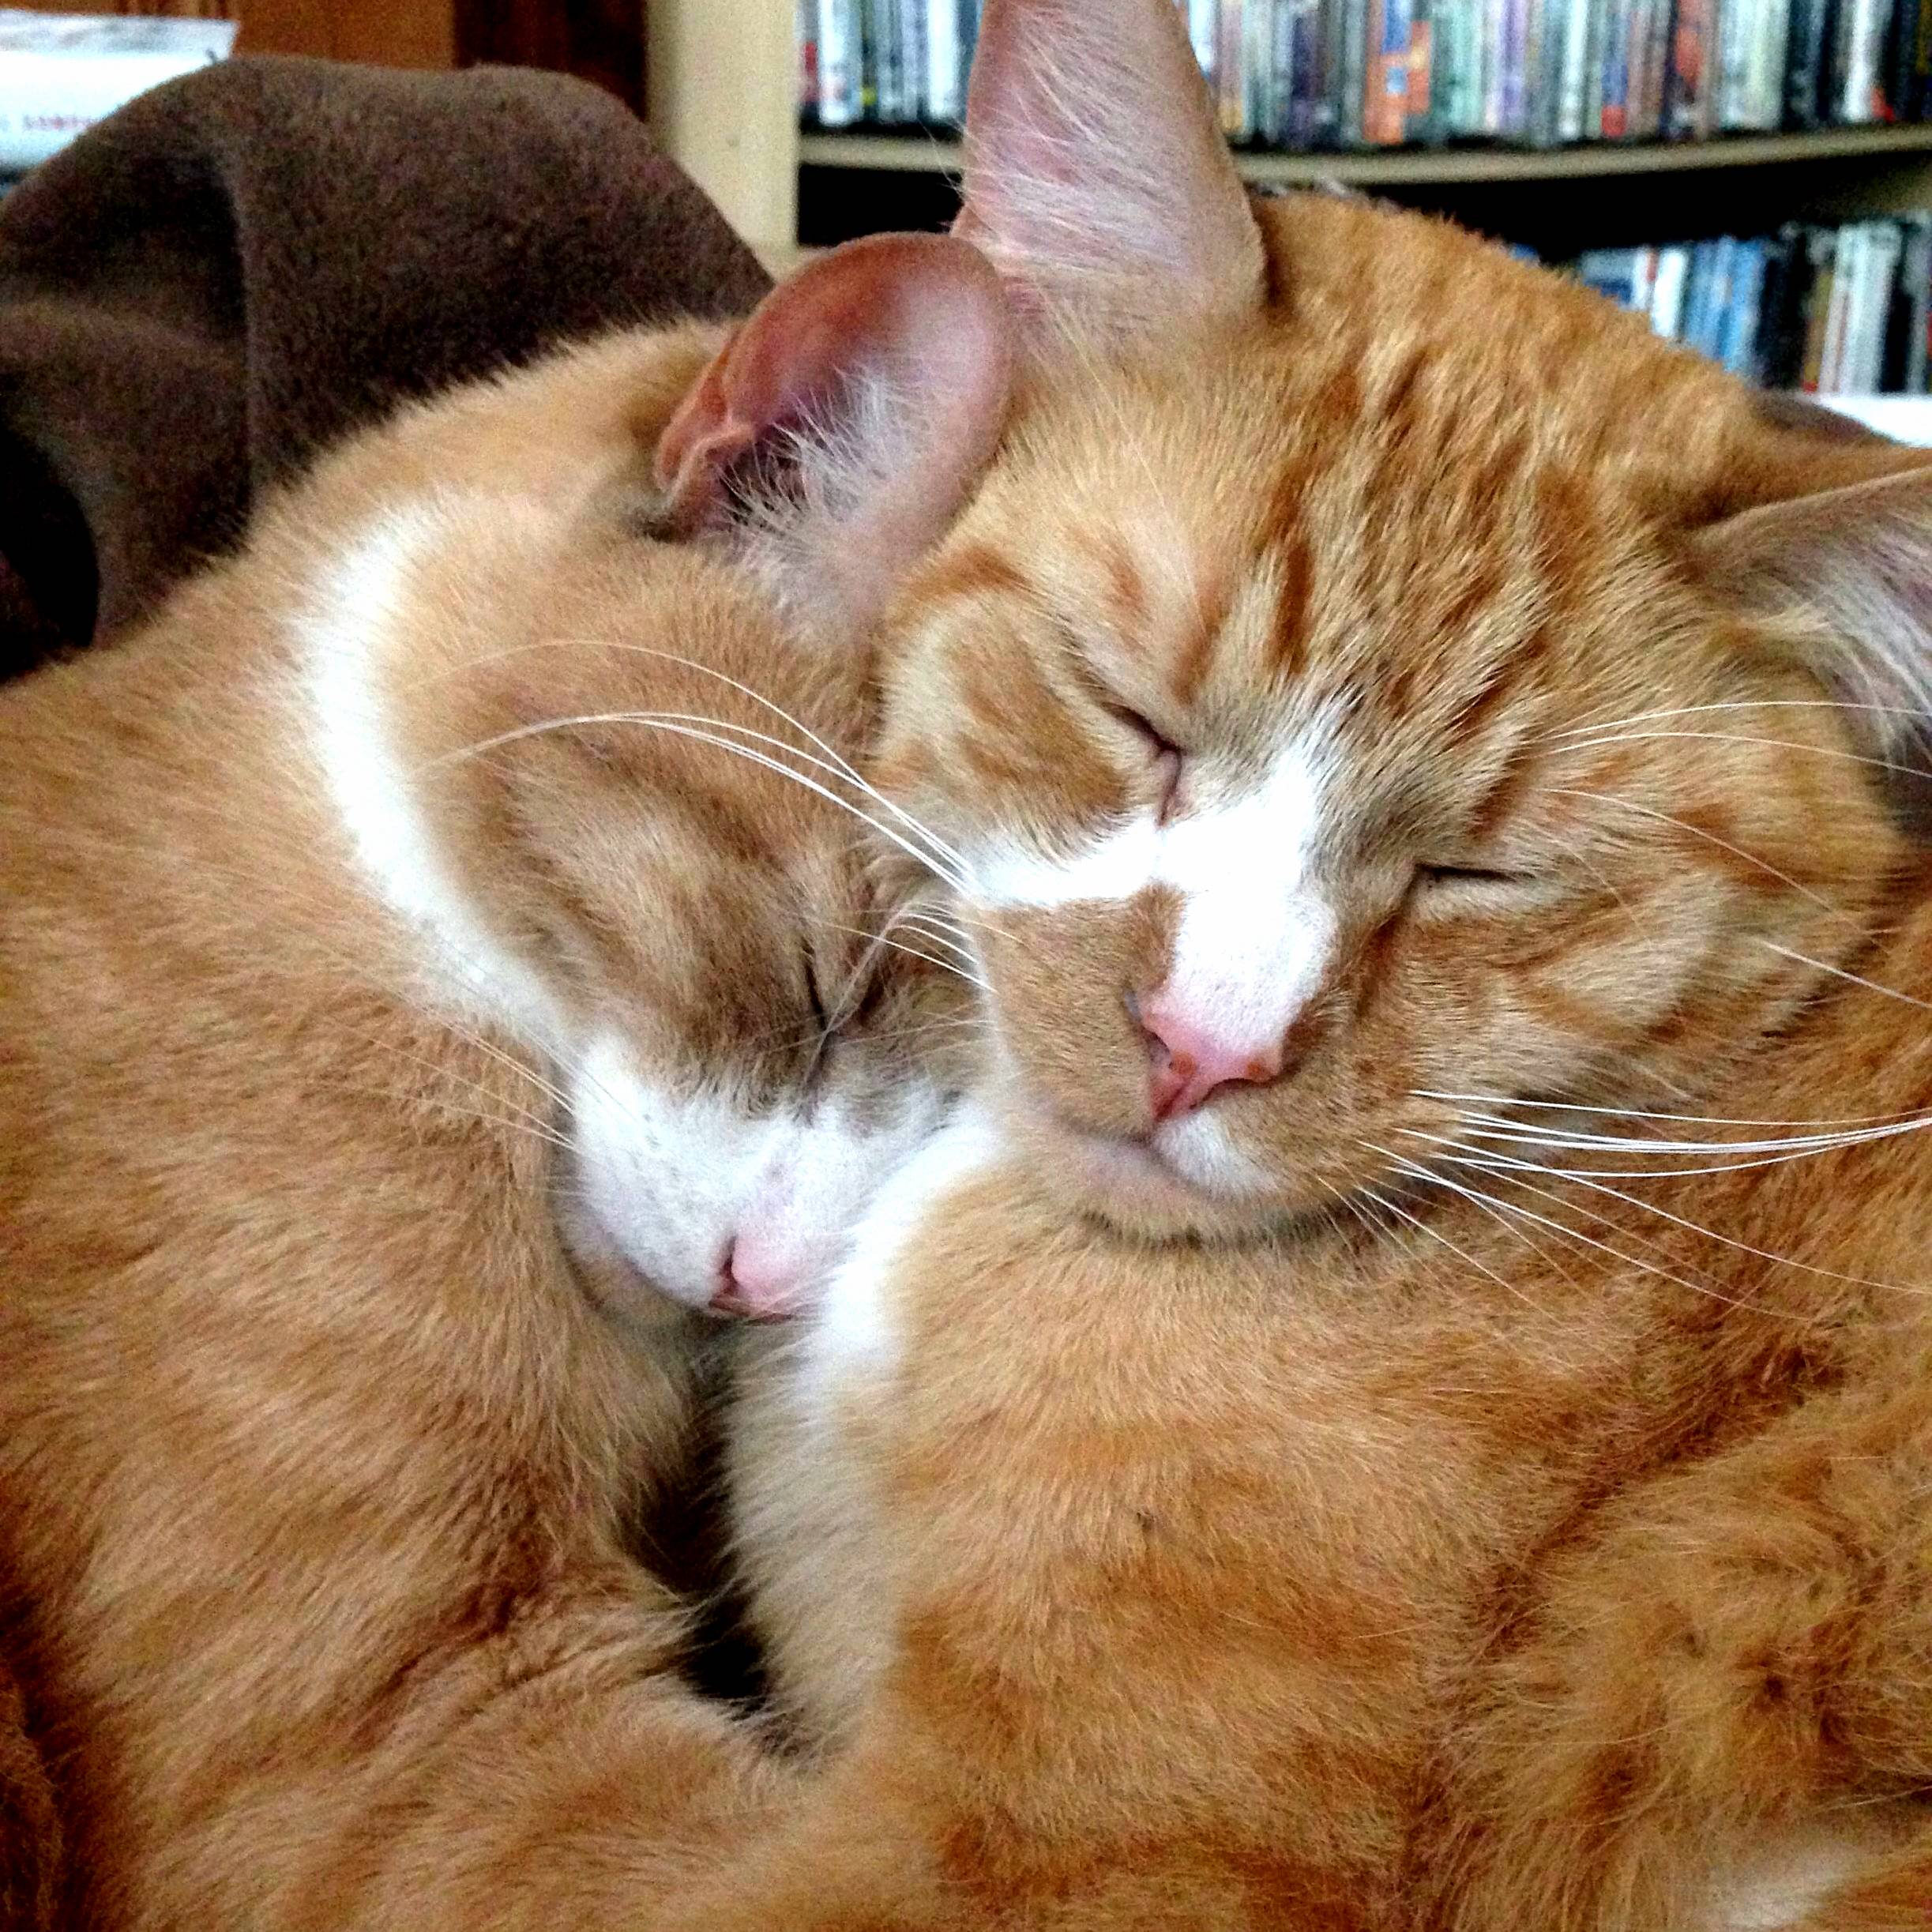 Brother cuddles.